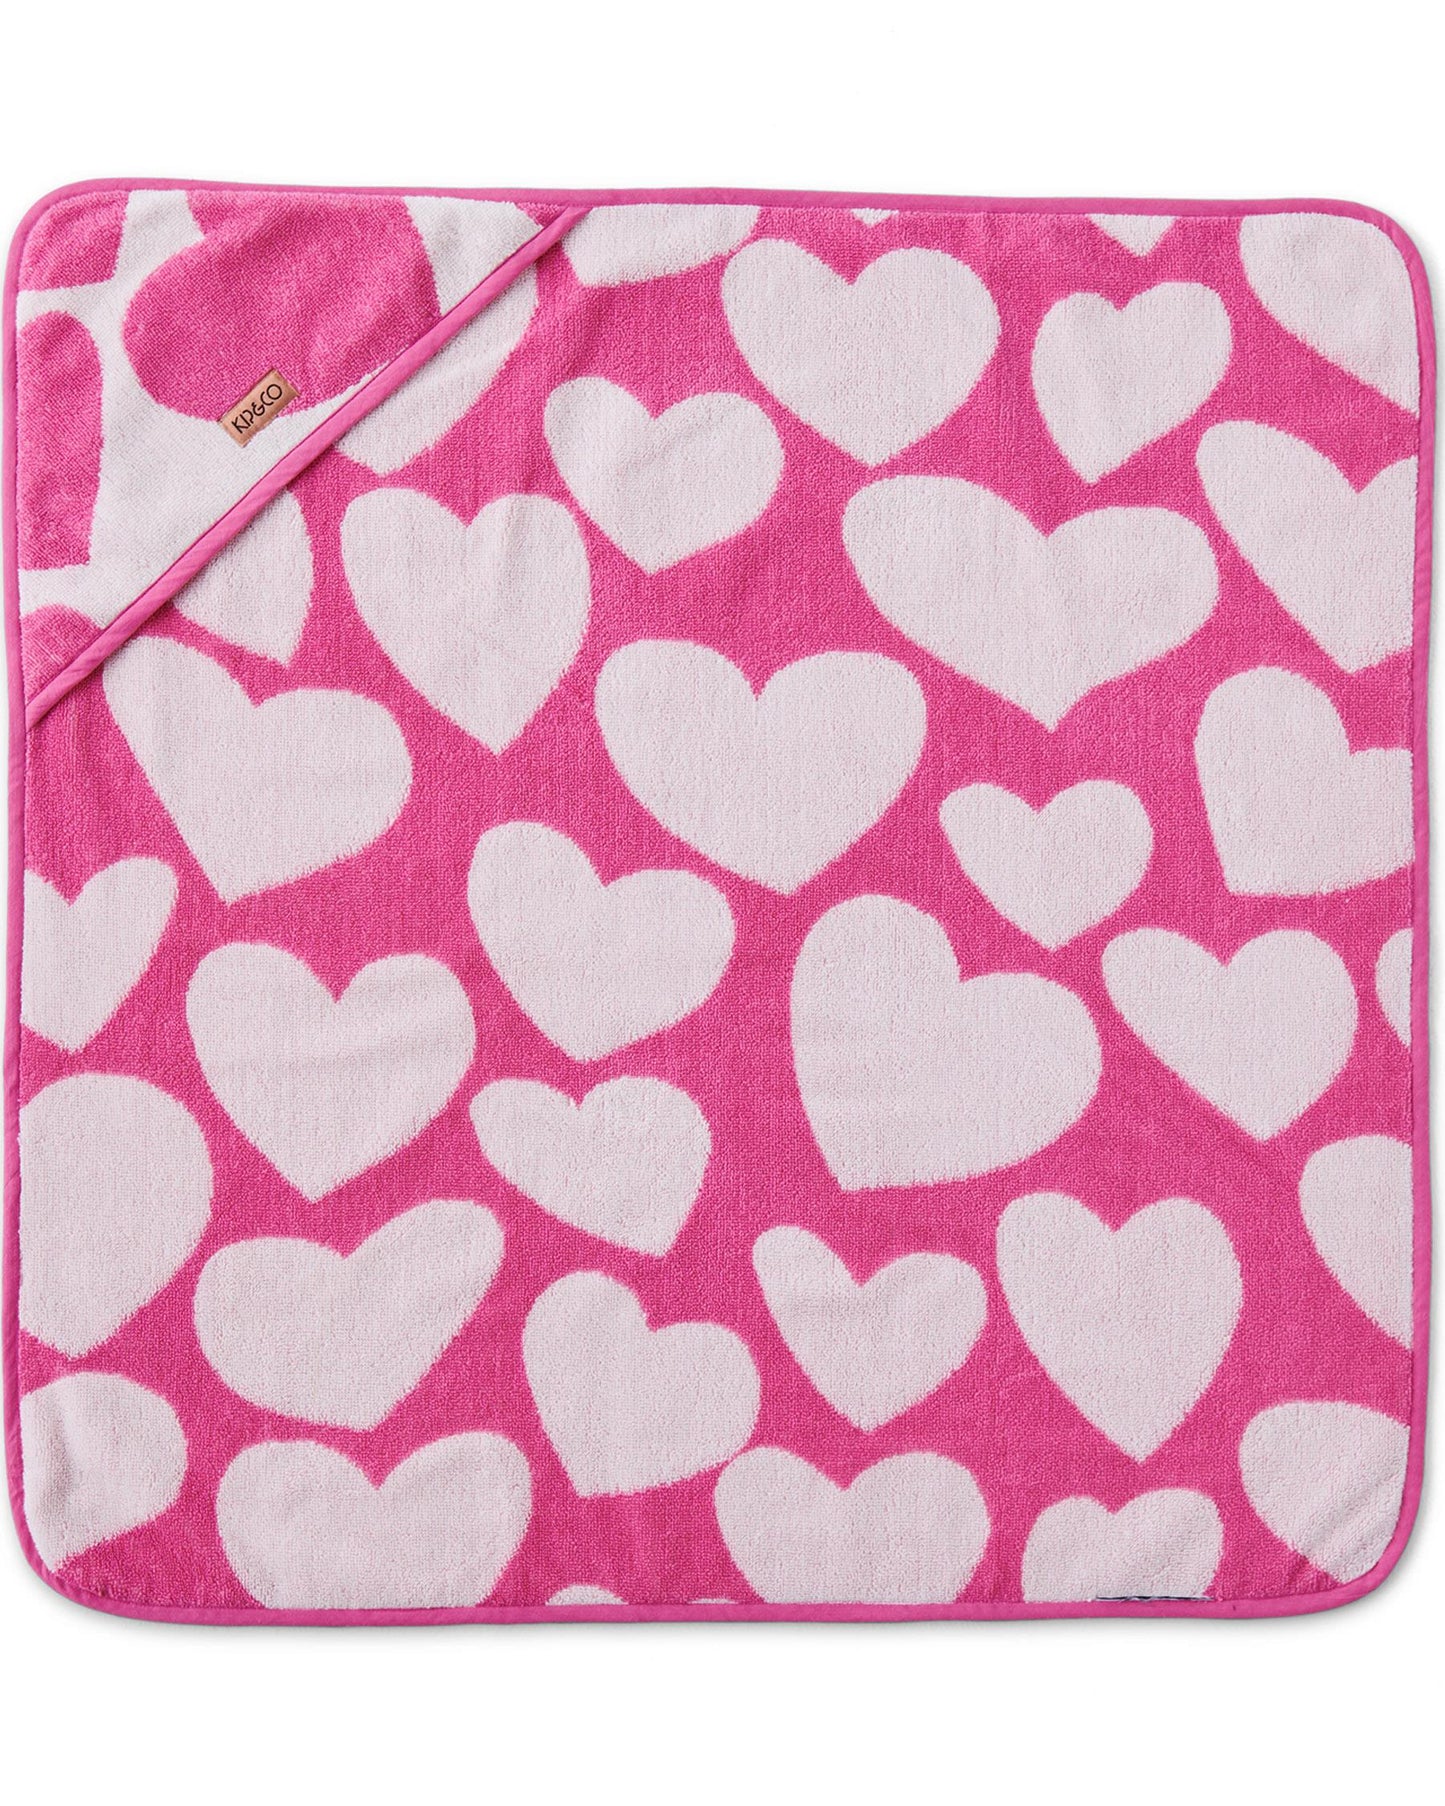 Big Hearted Terry Baby Towel